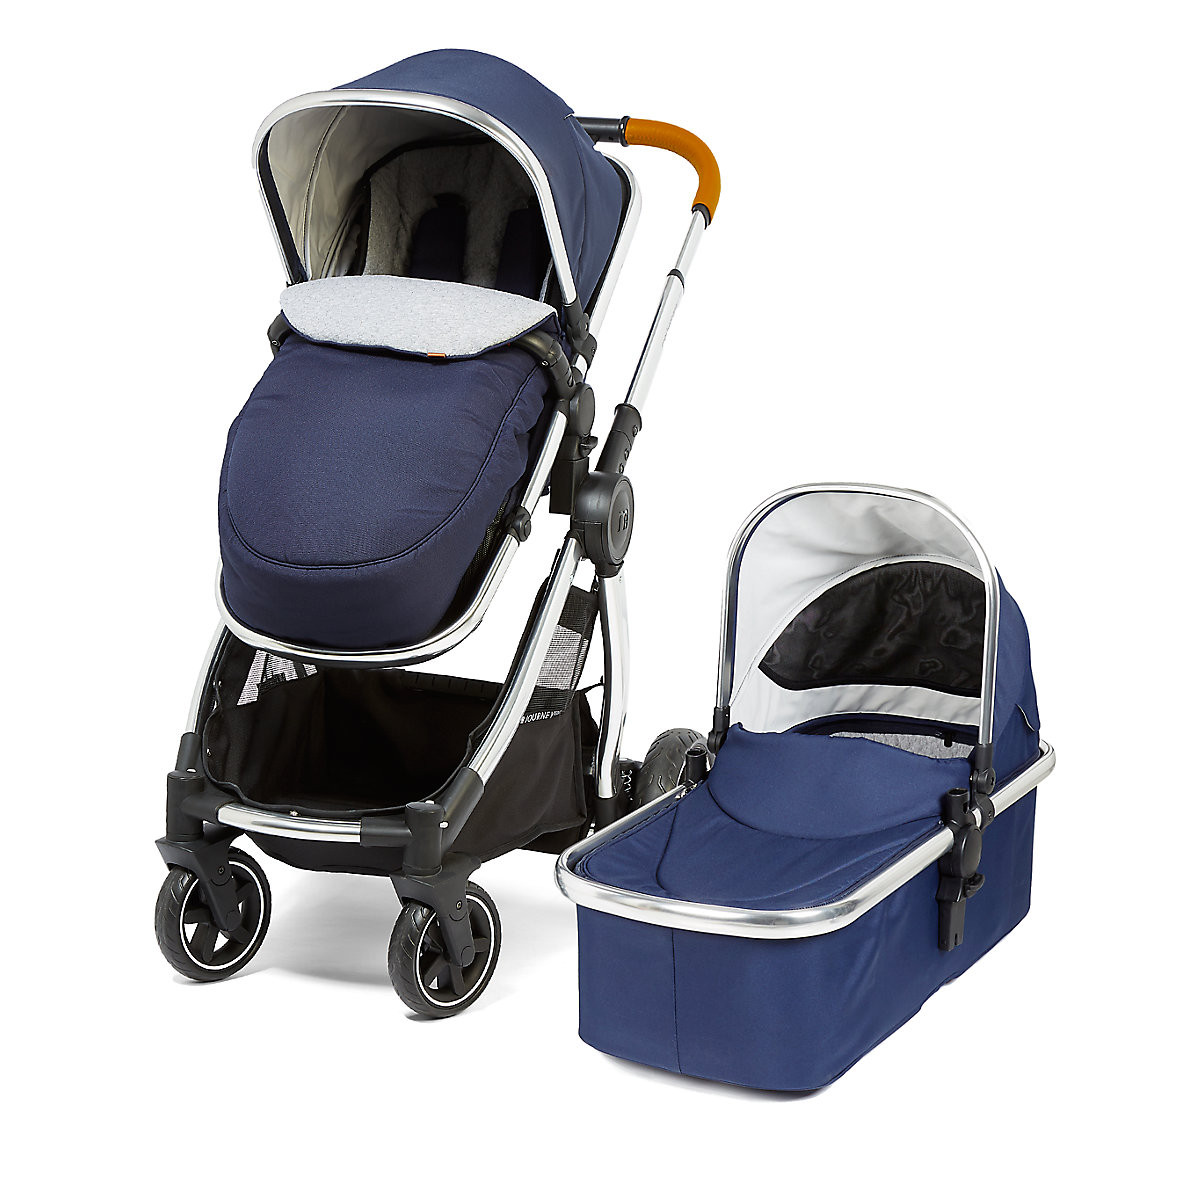 mothercare journey edit alloy